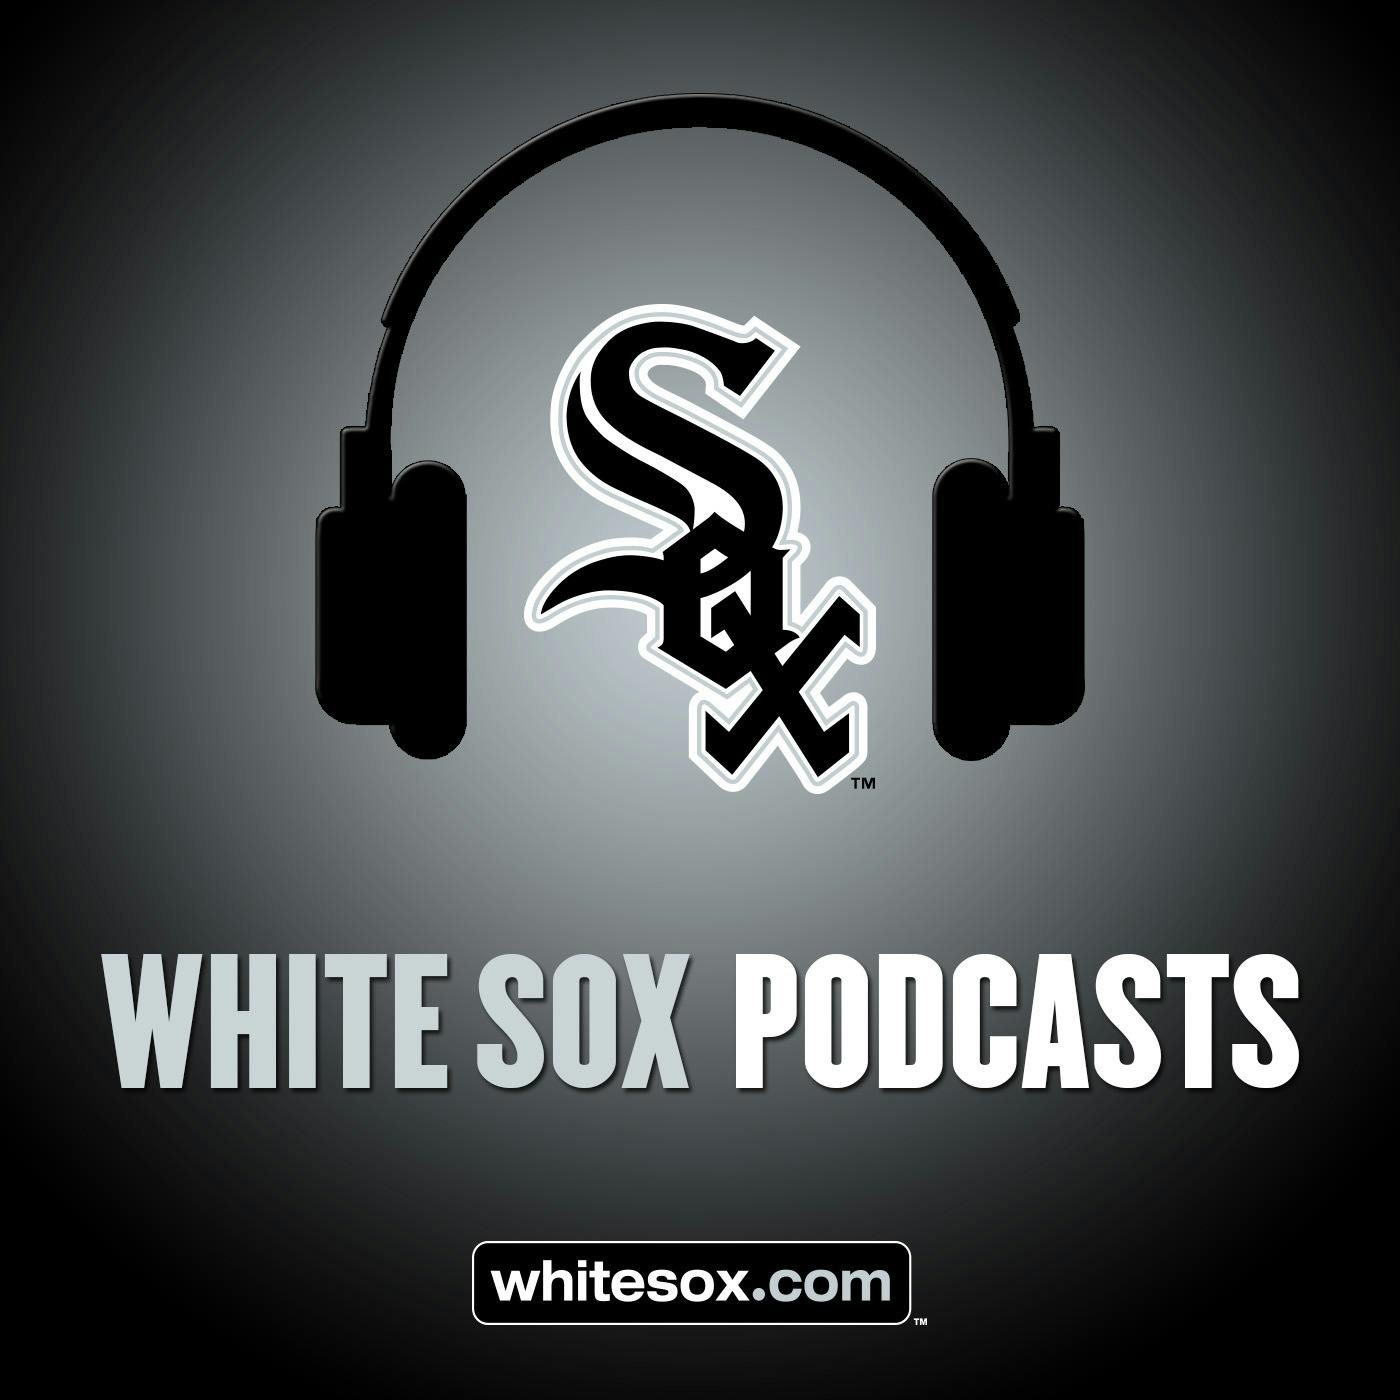 12/21/19: White Sox Weekly